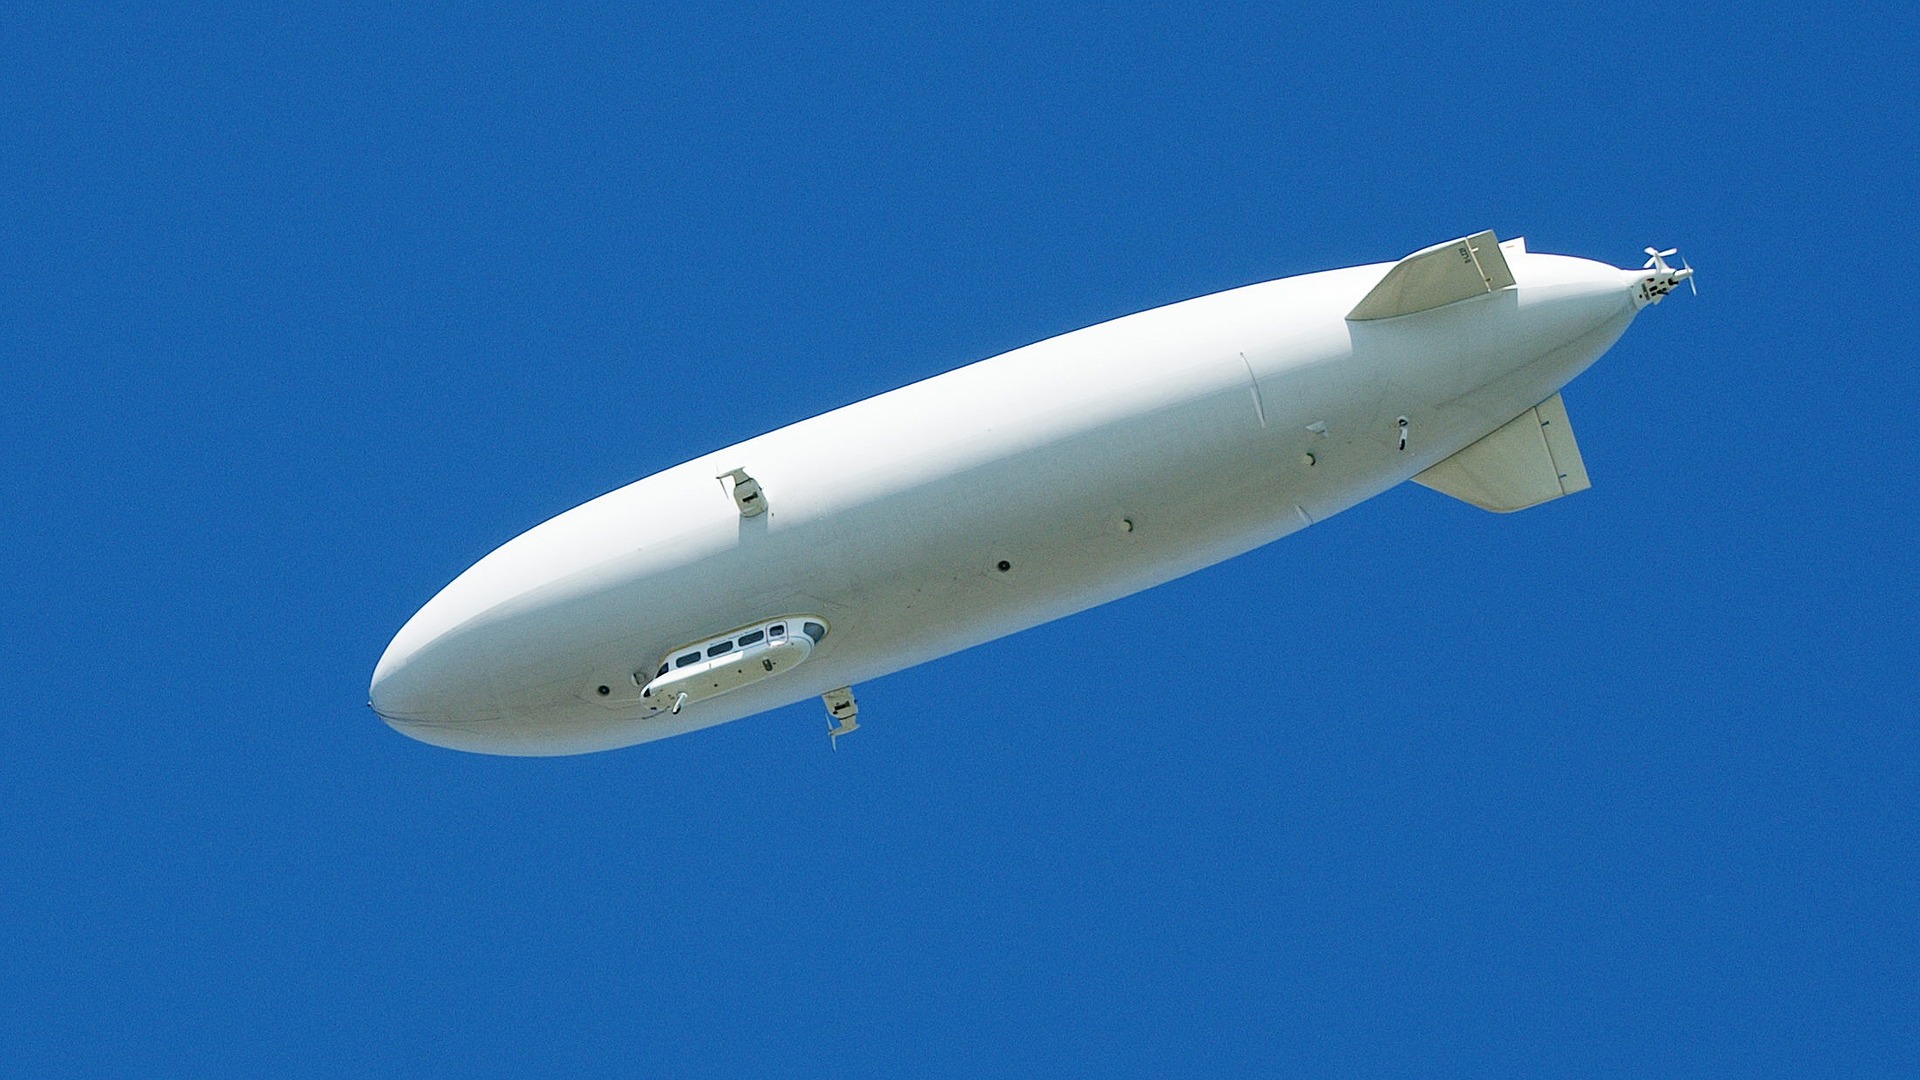 AT&T's Project Airship lifts off